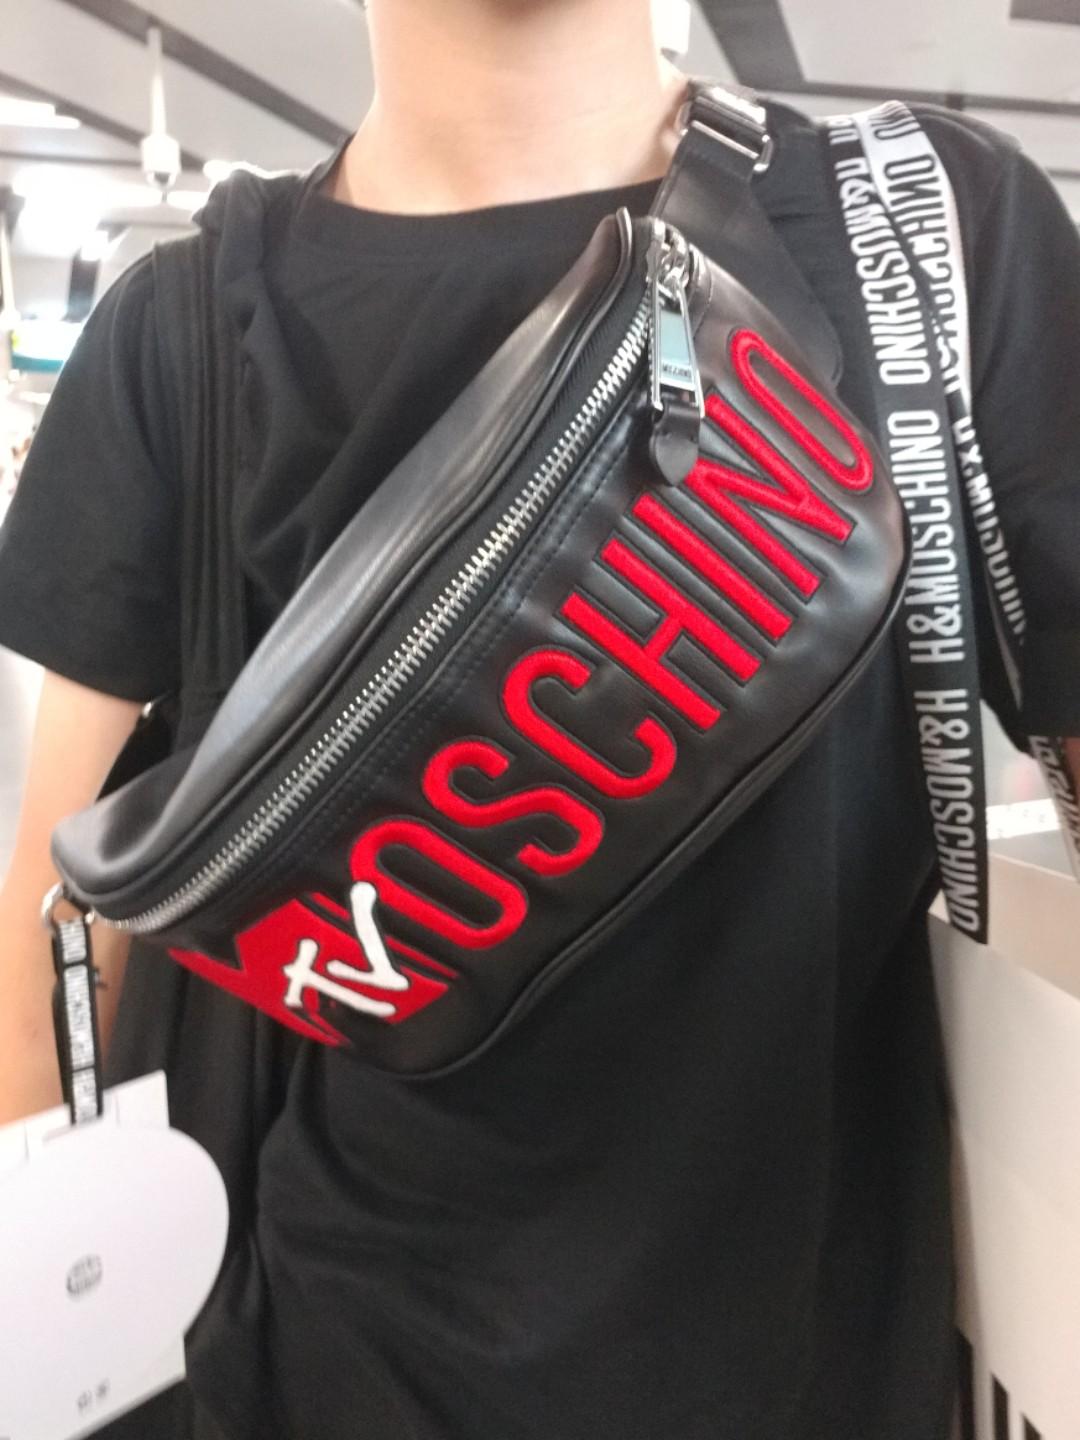 moschino fanny pack h&m